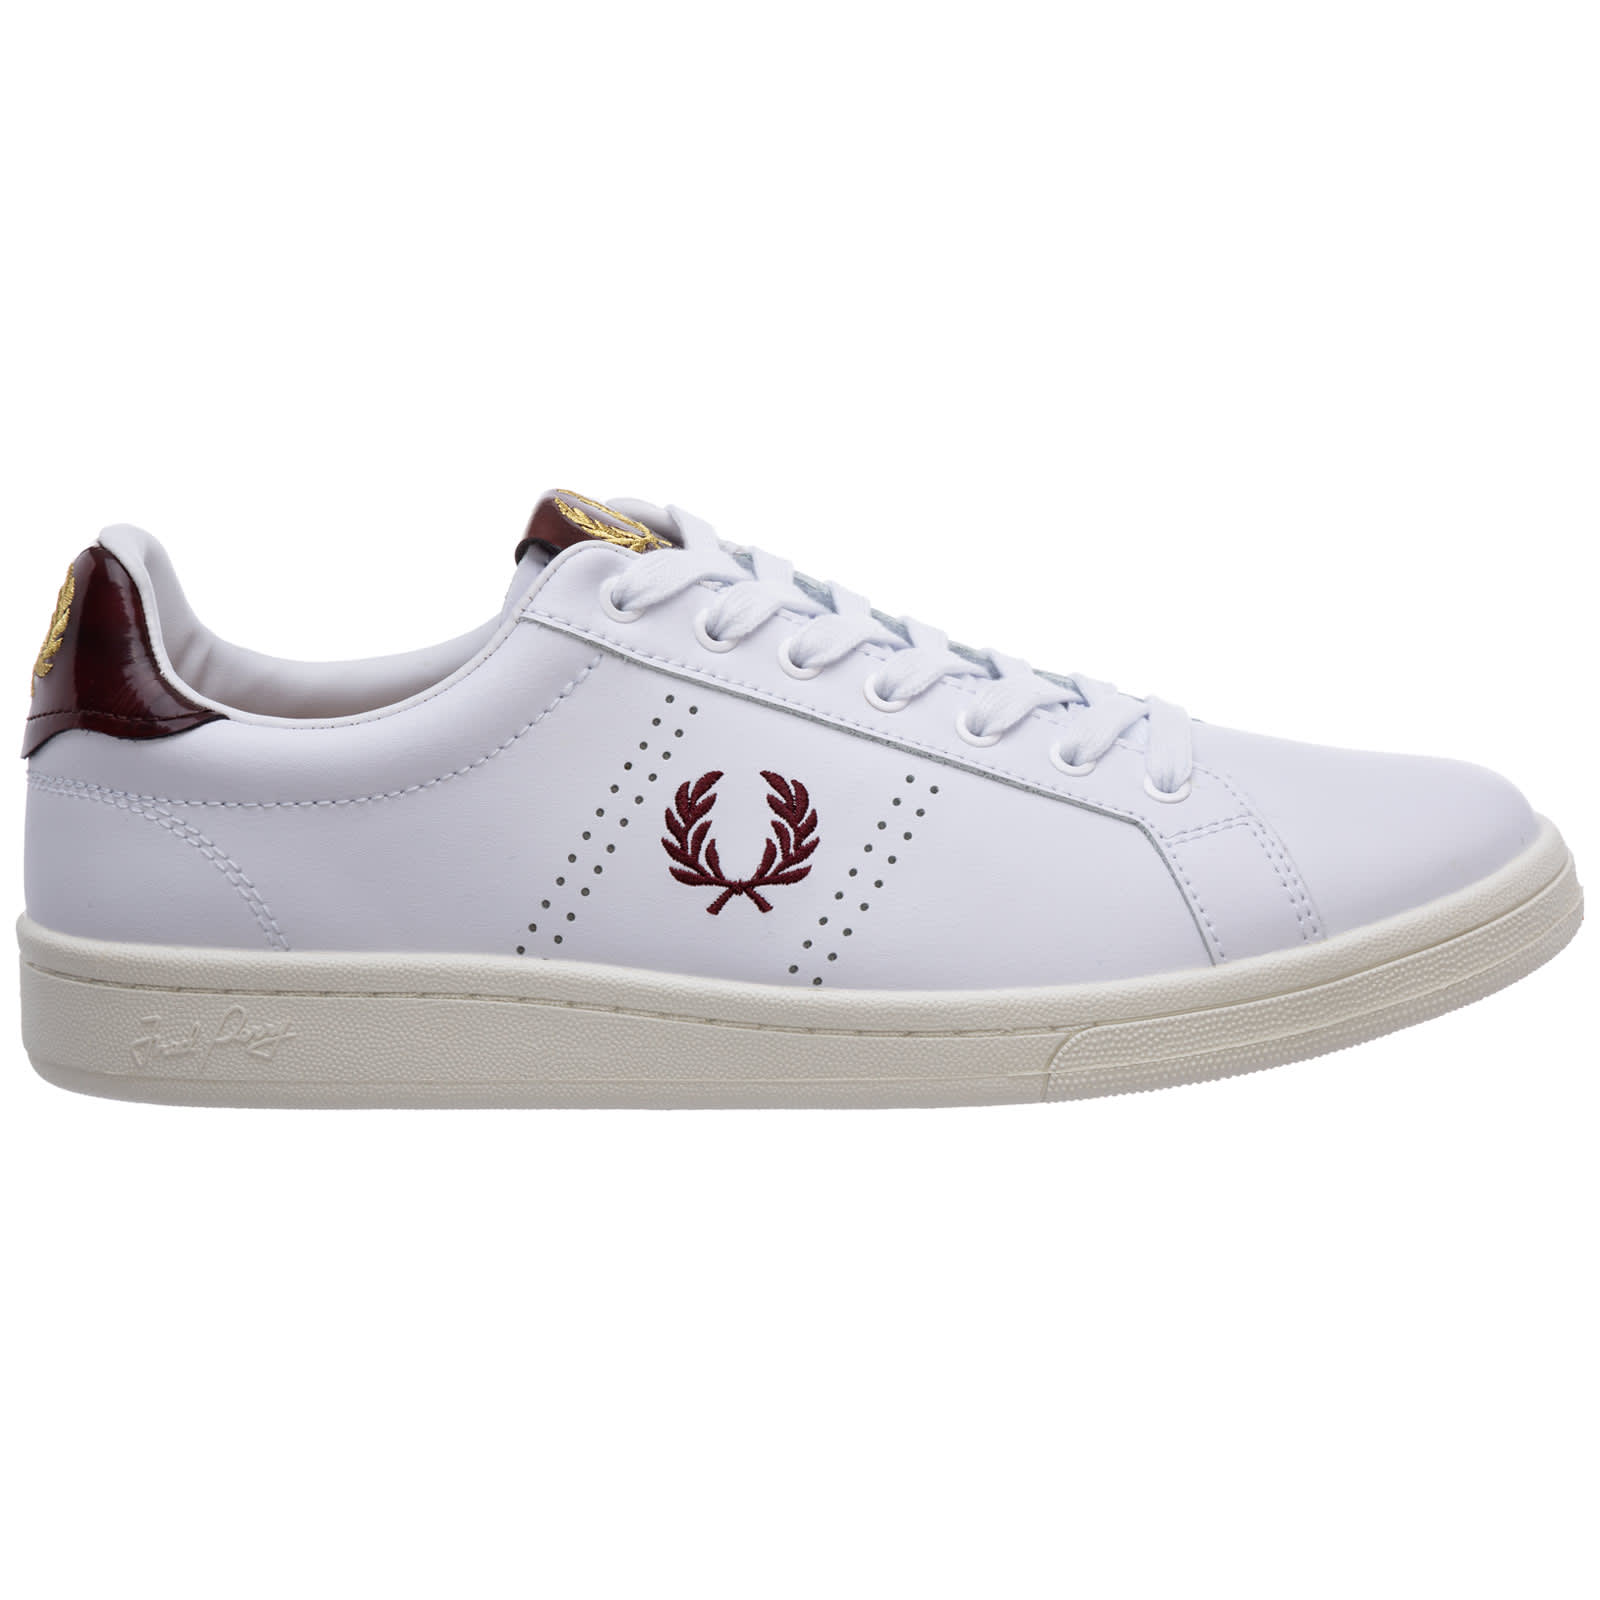 FRED PERRY B721 SNEAKERS,B1251